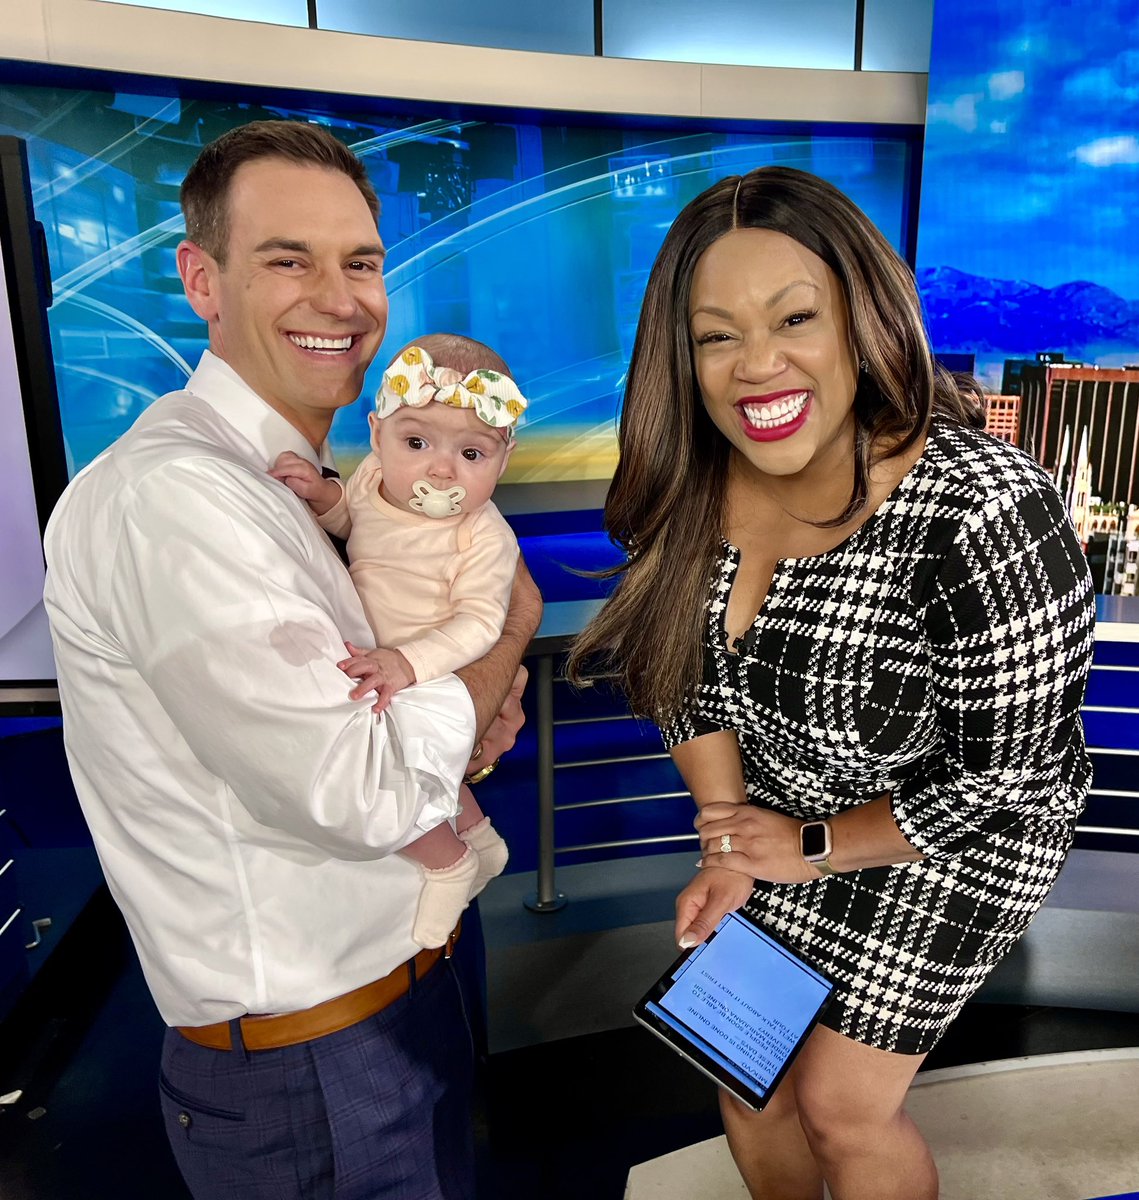 Baby Stella stealing the show! Surprise visit by @MichaelCBS4 little girl. Perfect Monday! Thanks @HaileyHolloway_ for sharing her w/us! @CBSNewsColorado @Mekialaya